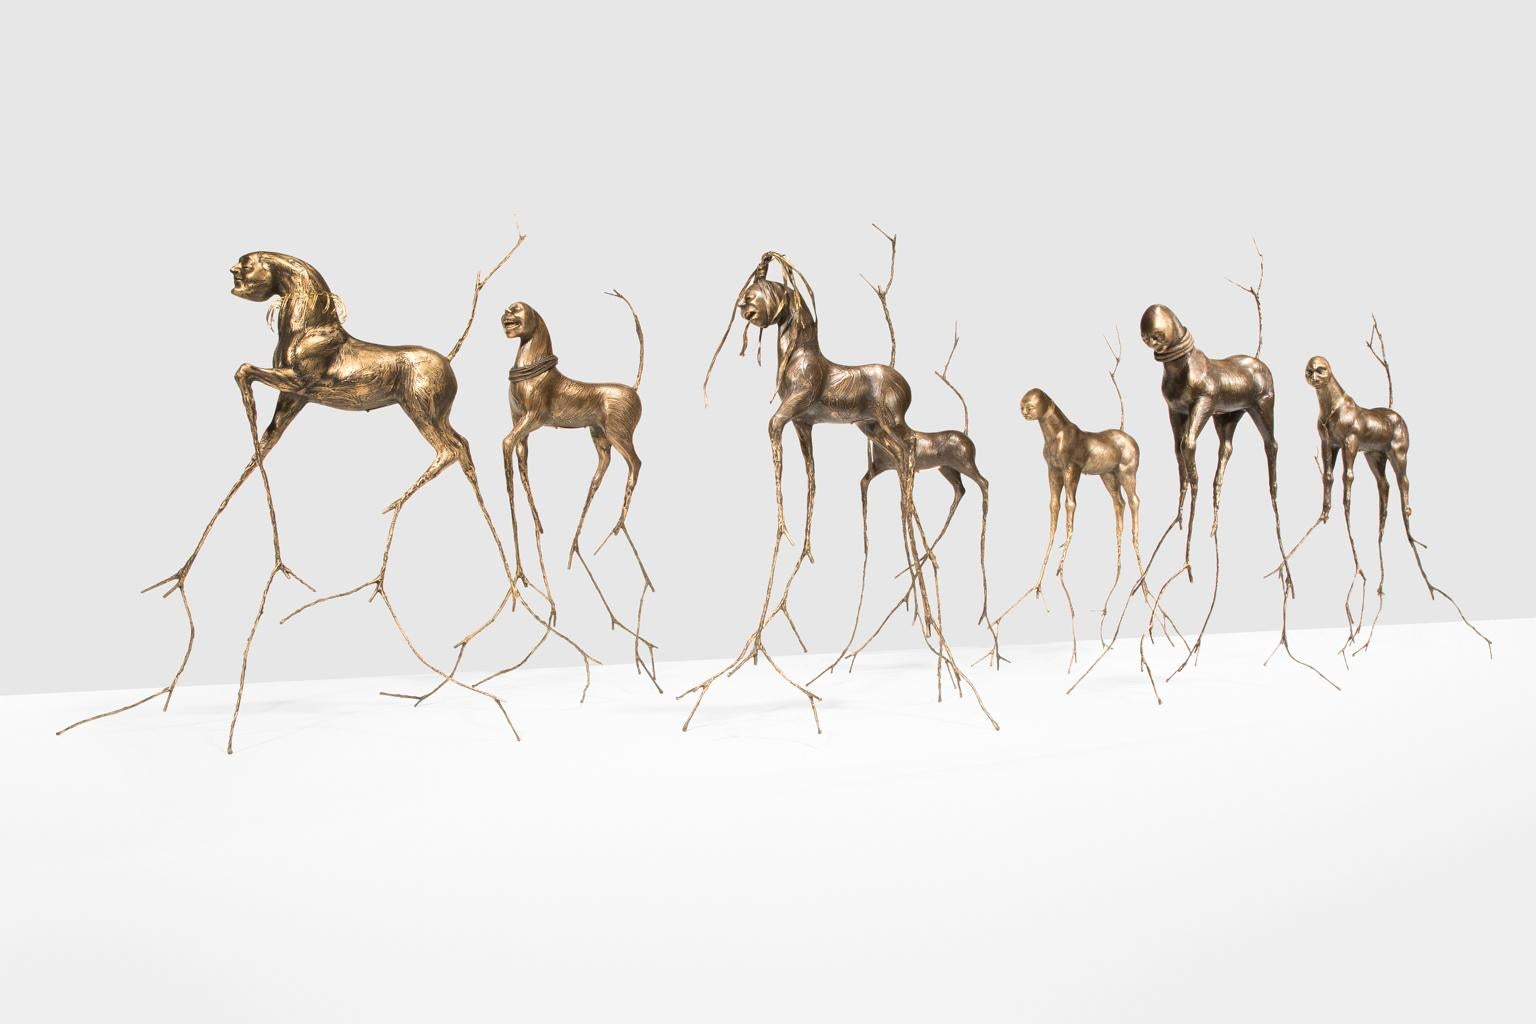 Delicate, frightening, otherworldly are all descriptions that apply to these unique sculptures by artist, Kirk Roda. 